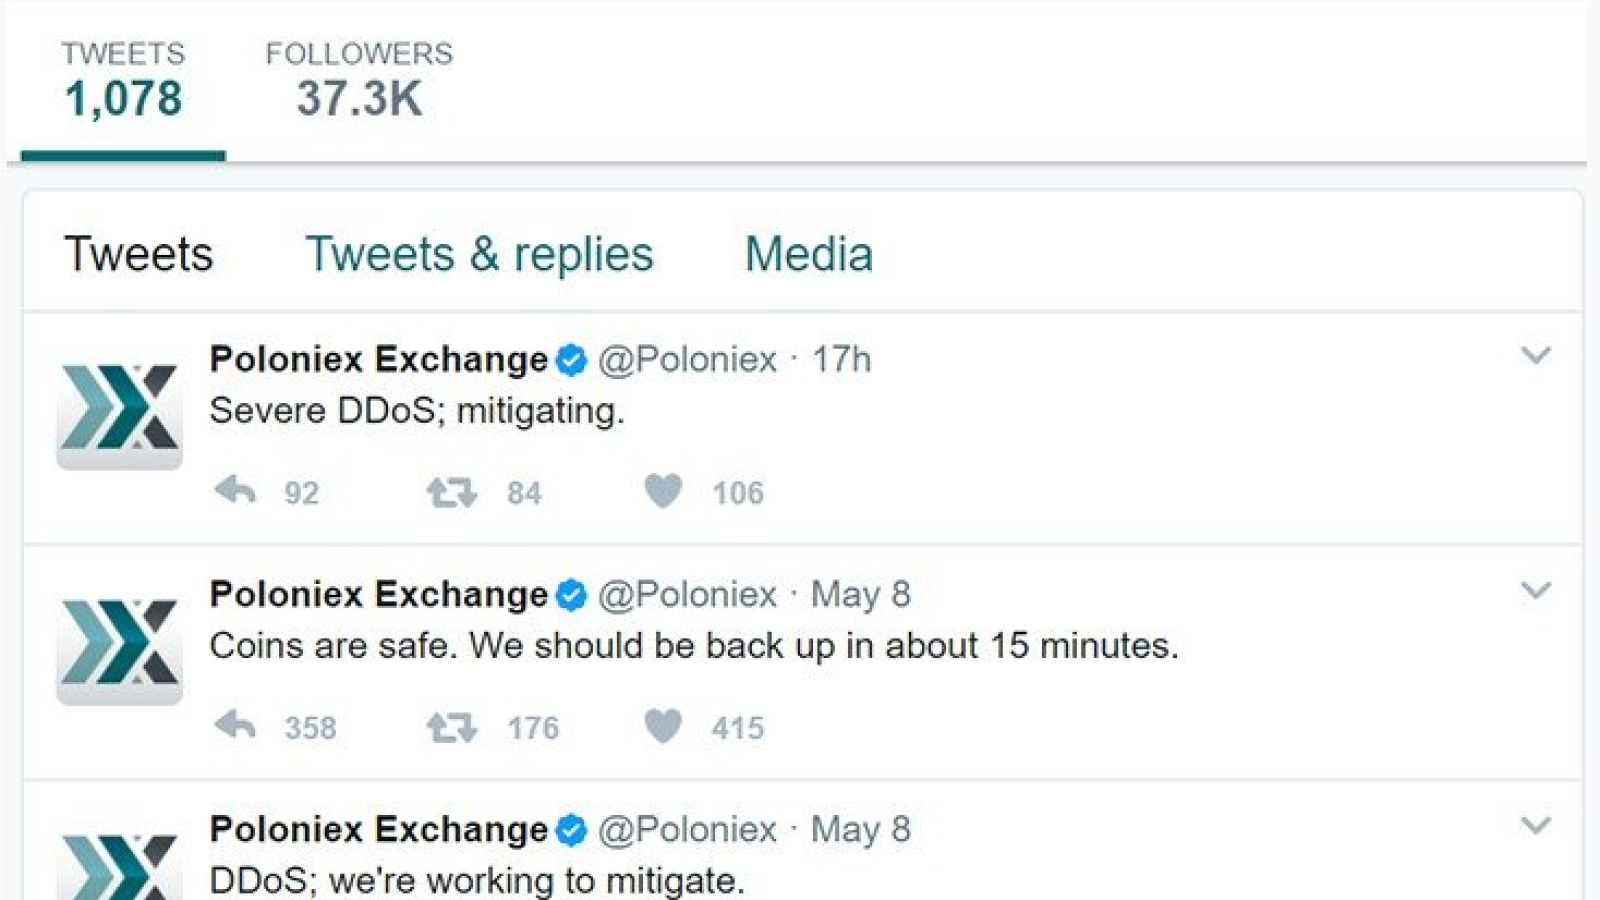 Hackers attack Poloniex quite frequently